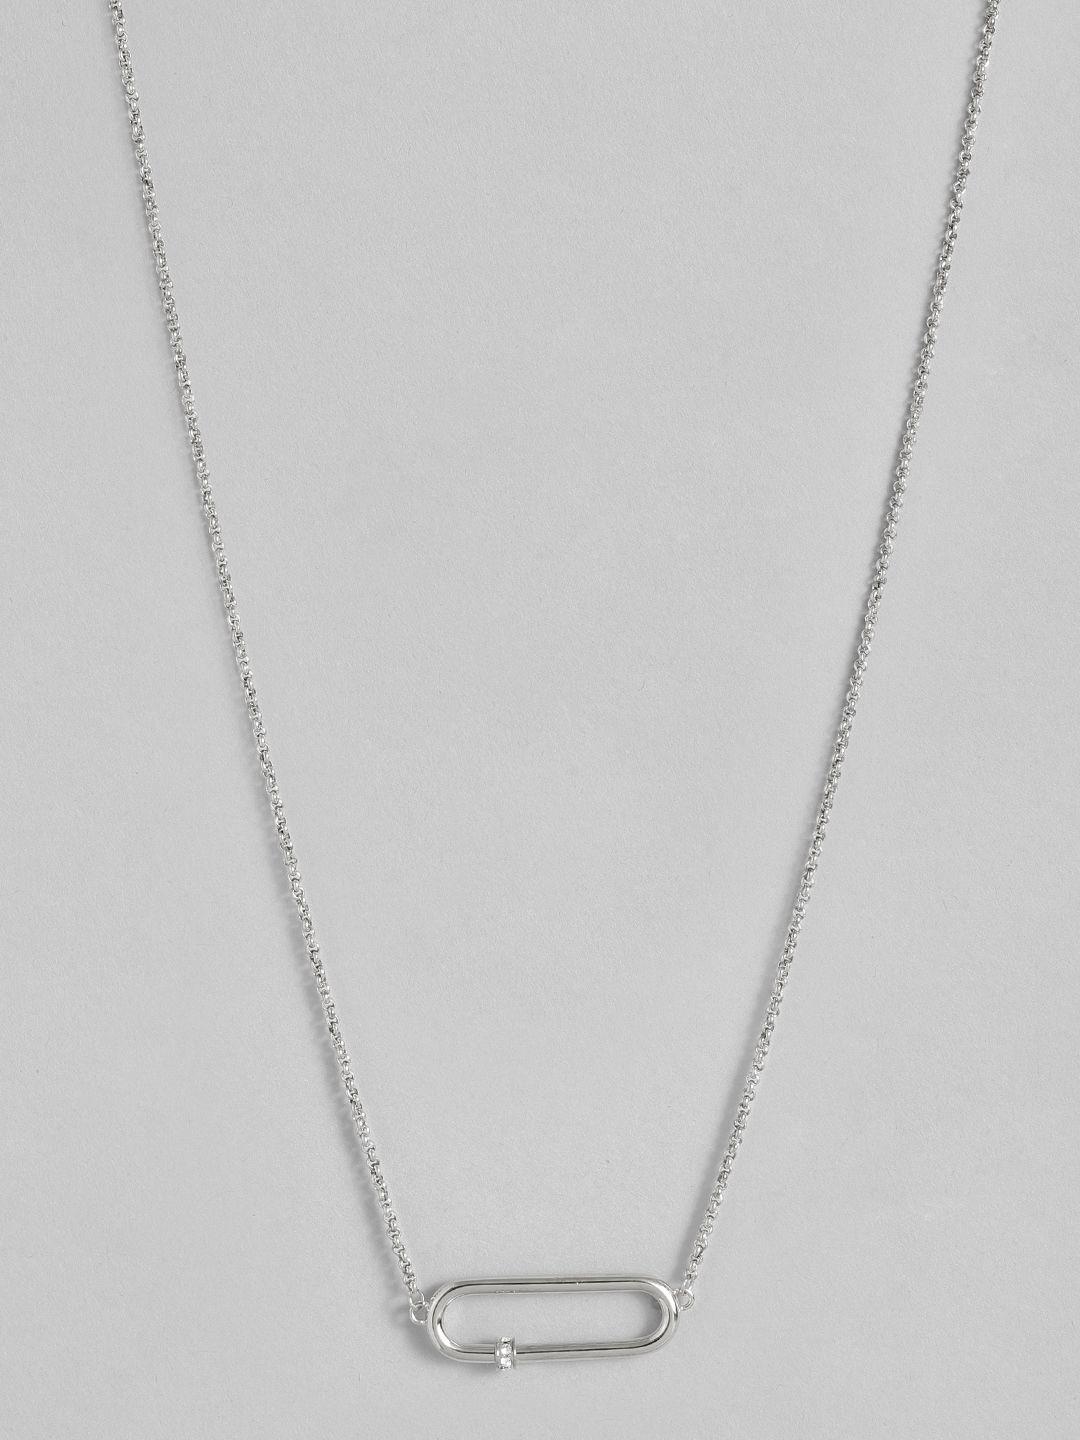 calvin-klein-elongated-oval-shaped-stainless-steel-necklace